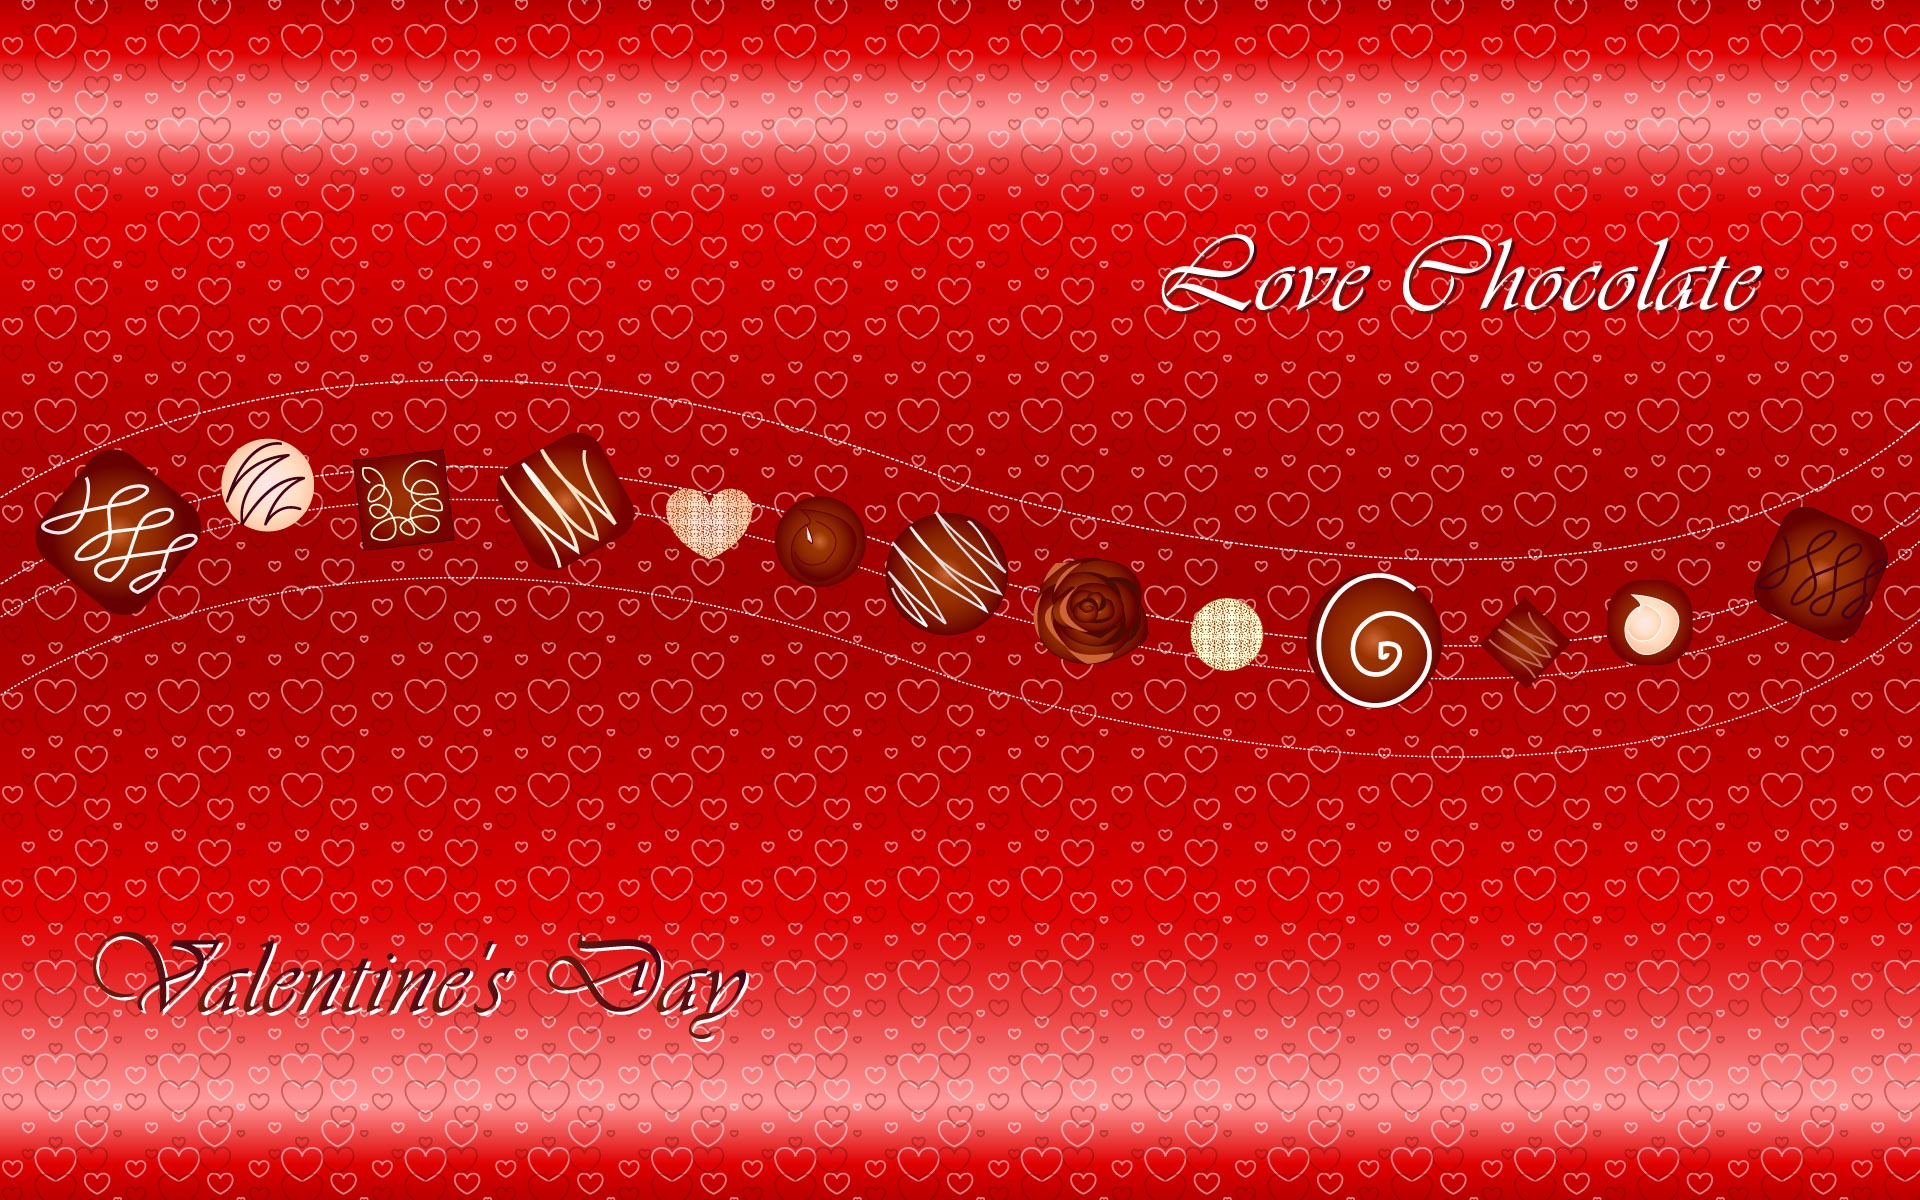 Valentine's Day Theme Wallpapers (1) #2 - 1920x1200